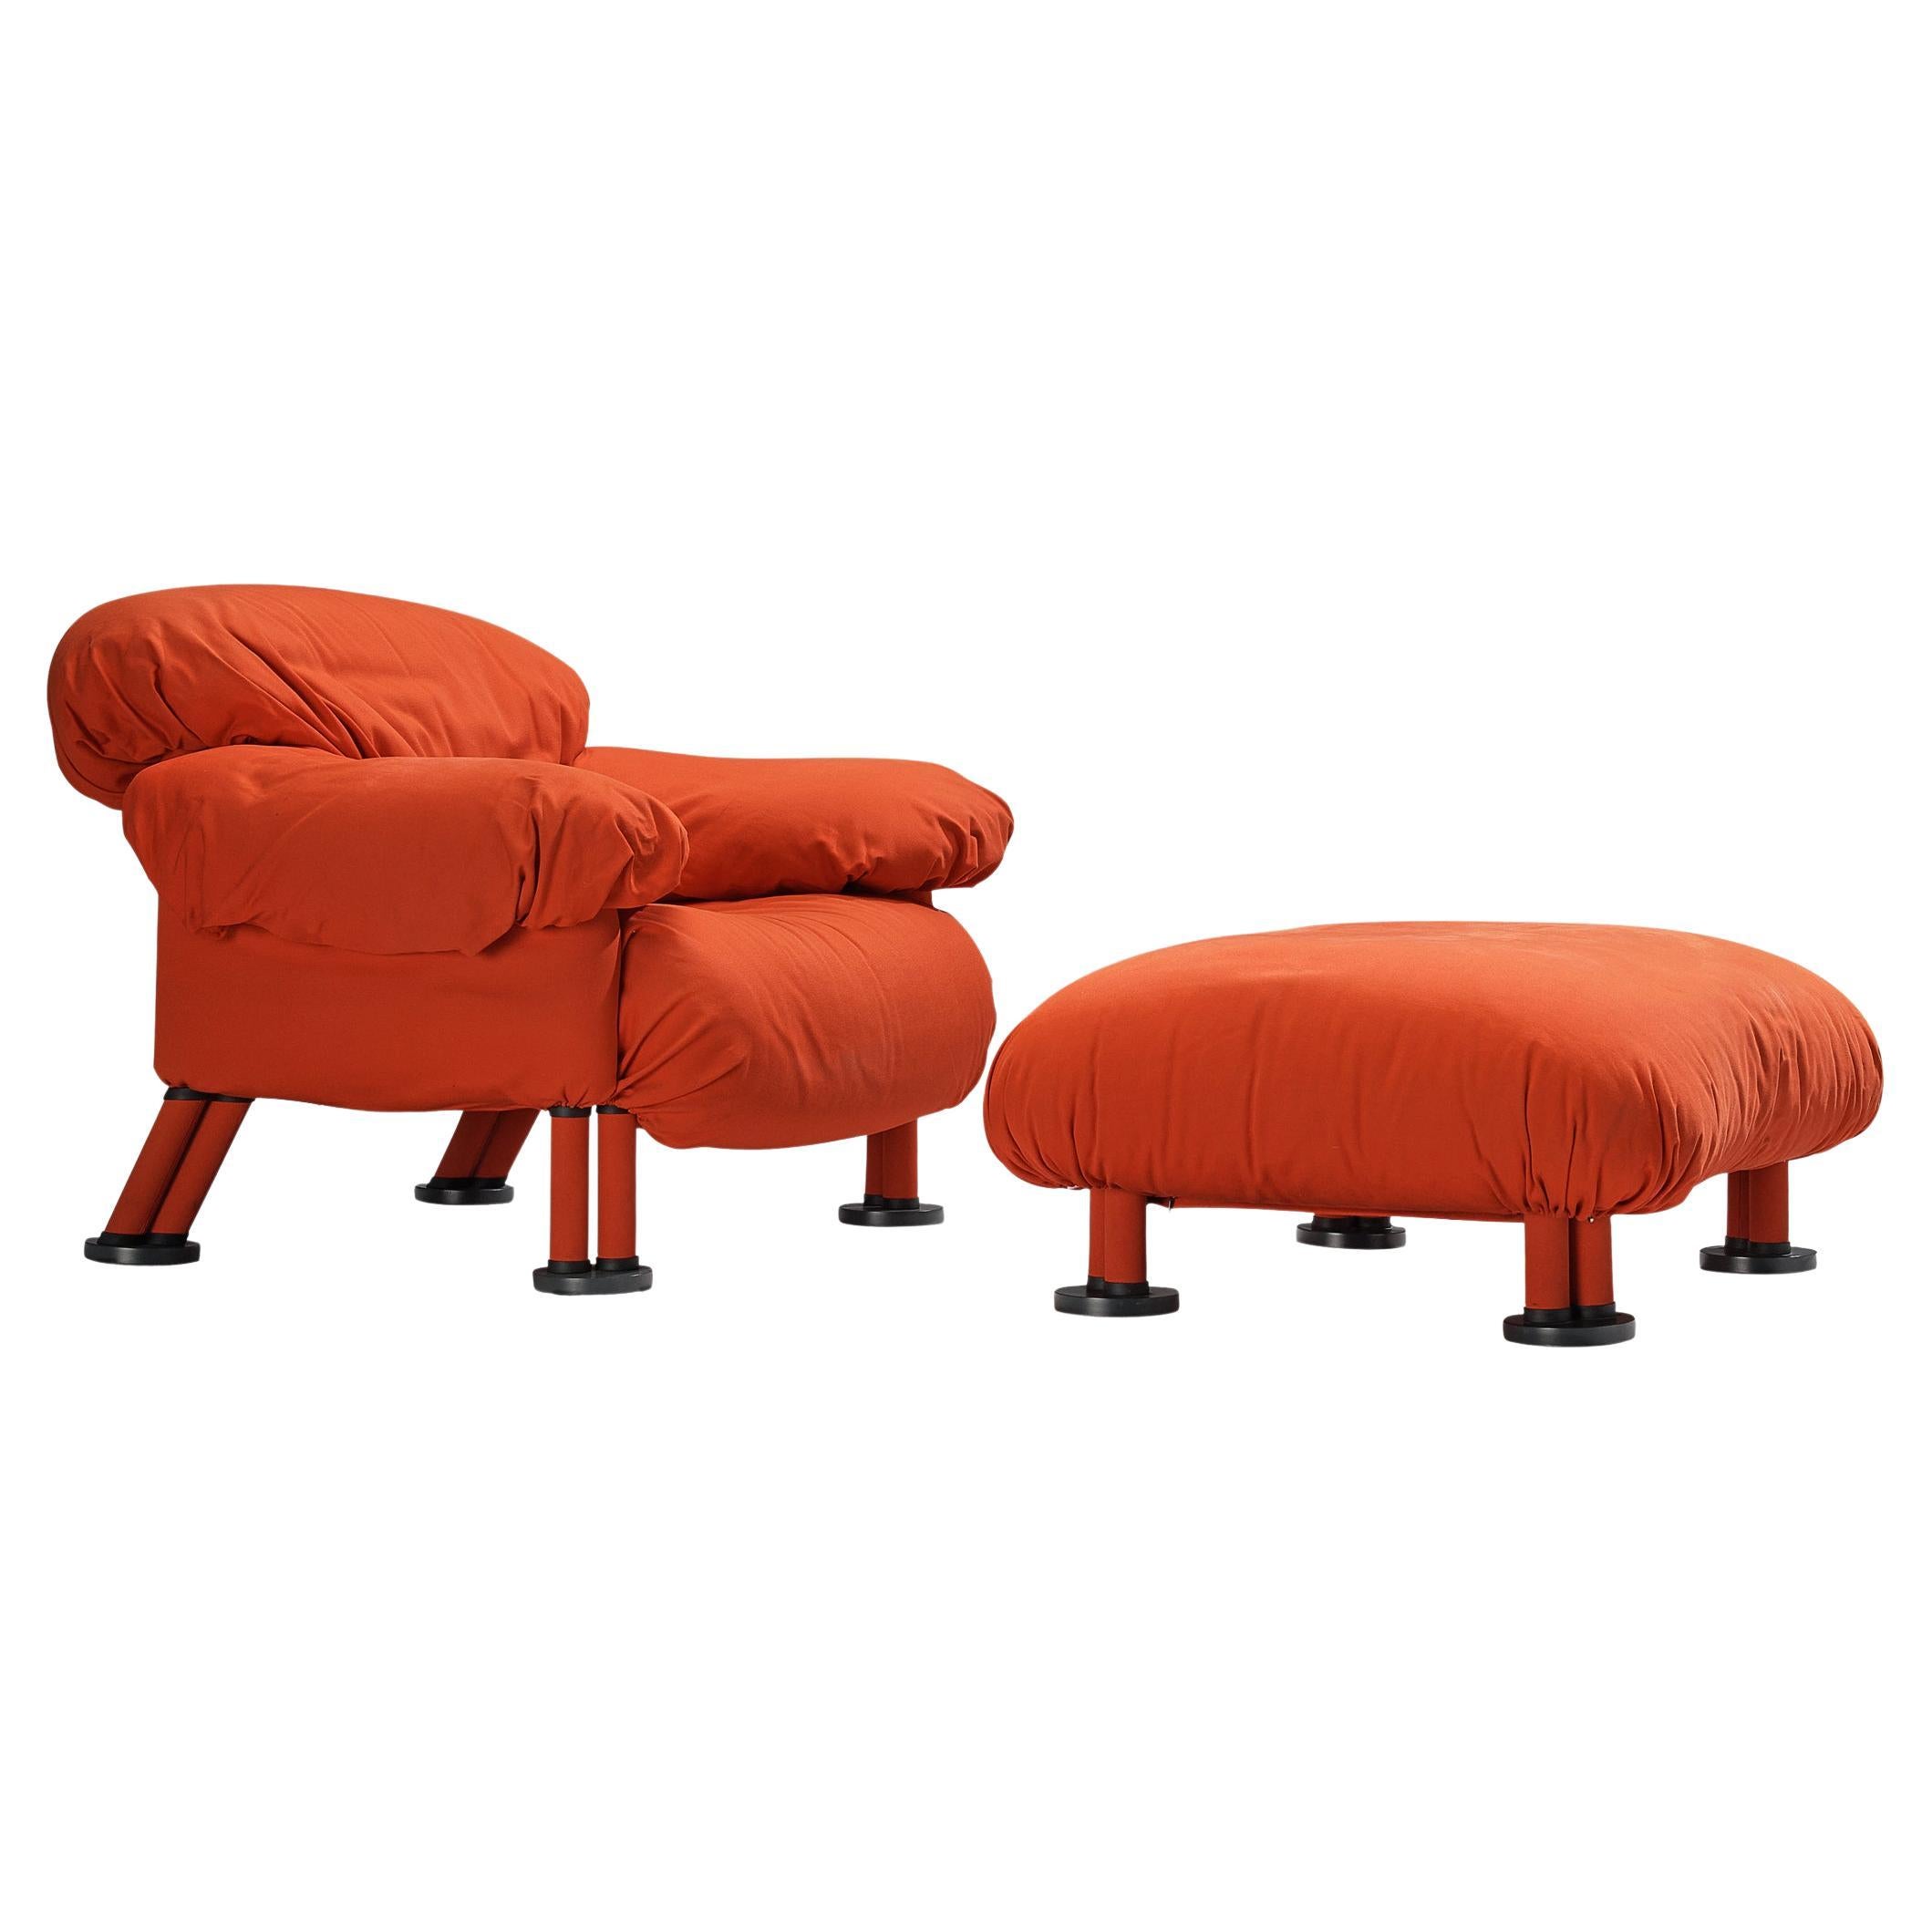 Afra & Tobia Scarpa for Meritalia Lounge Chair and Ottoman For Sale